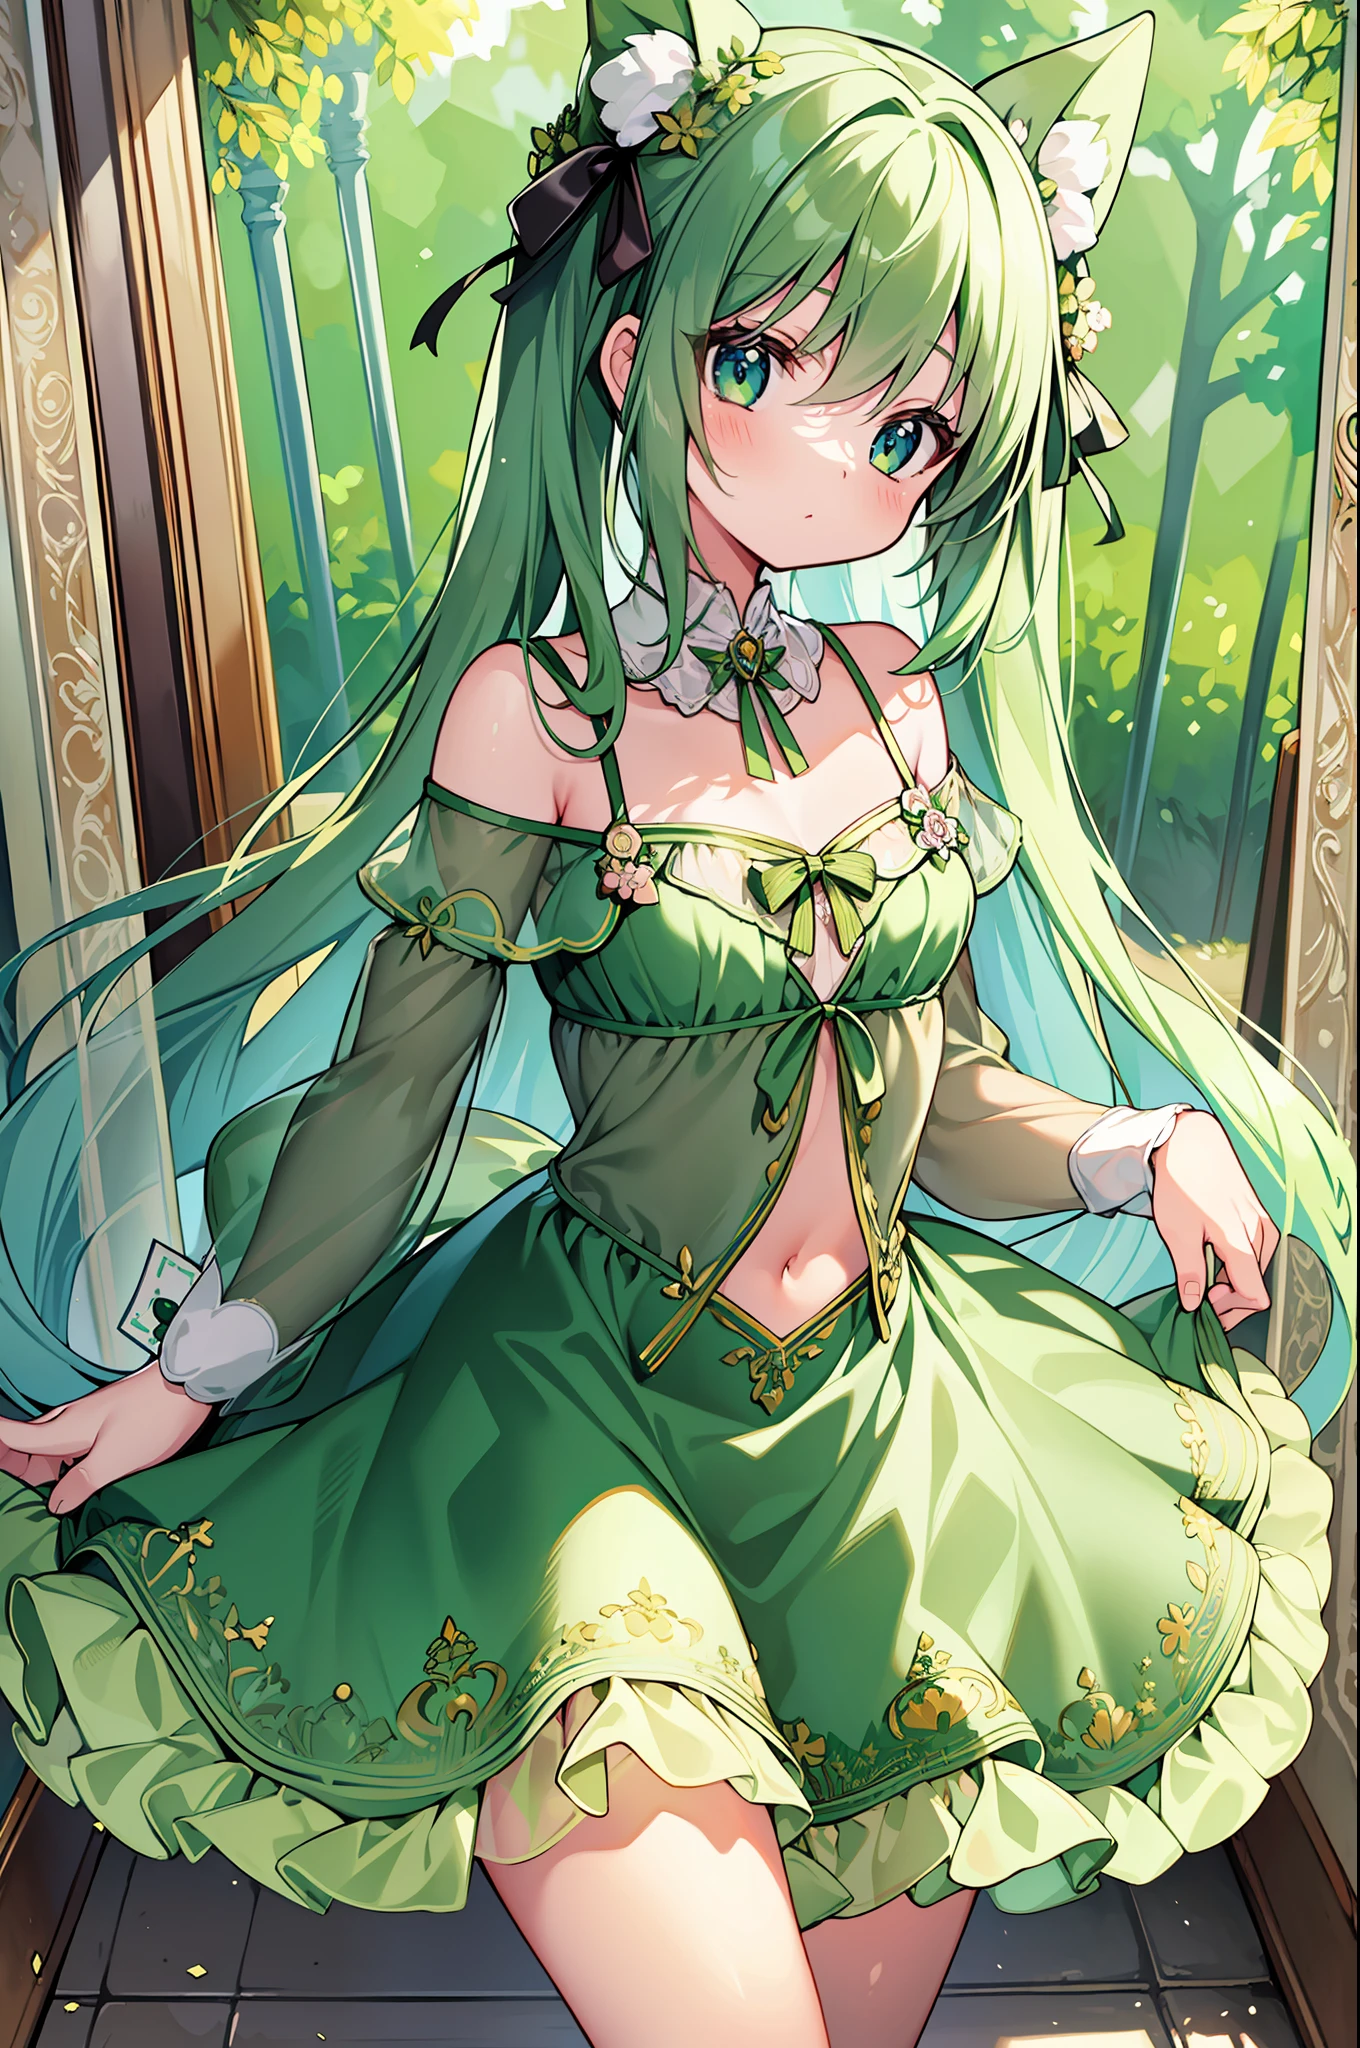 (MASTERPIECE), (Best Quality), (Super Detail), Official Art, One Girl,  with Pale Green Hair,  , , Green and White See-Through Dress, Sleeveless, Off Shoulder, Small, Very Small, Small, Cleavage, Thigh Focus, Navel, Card Illustration, Wind